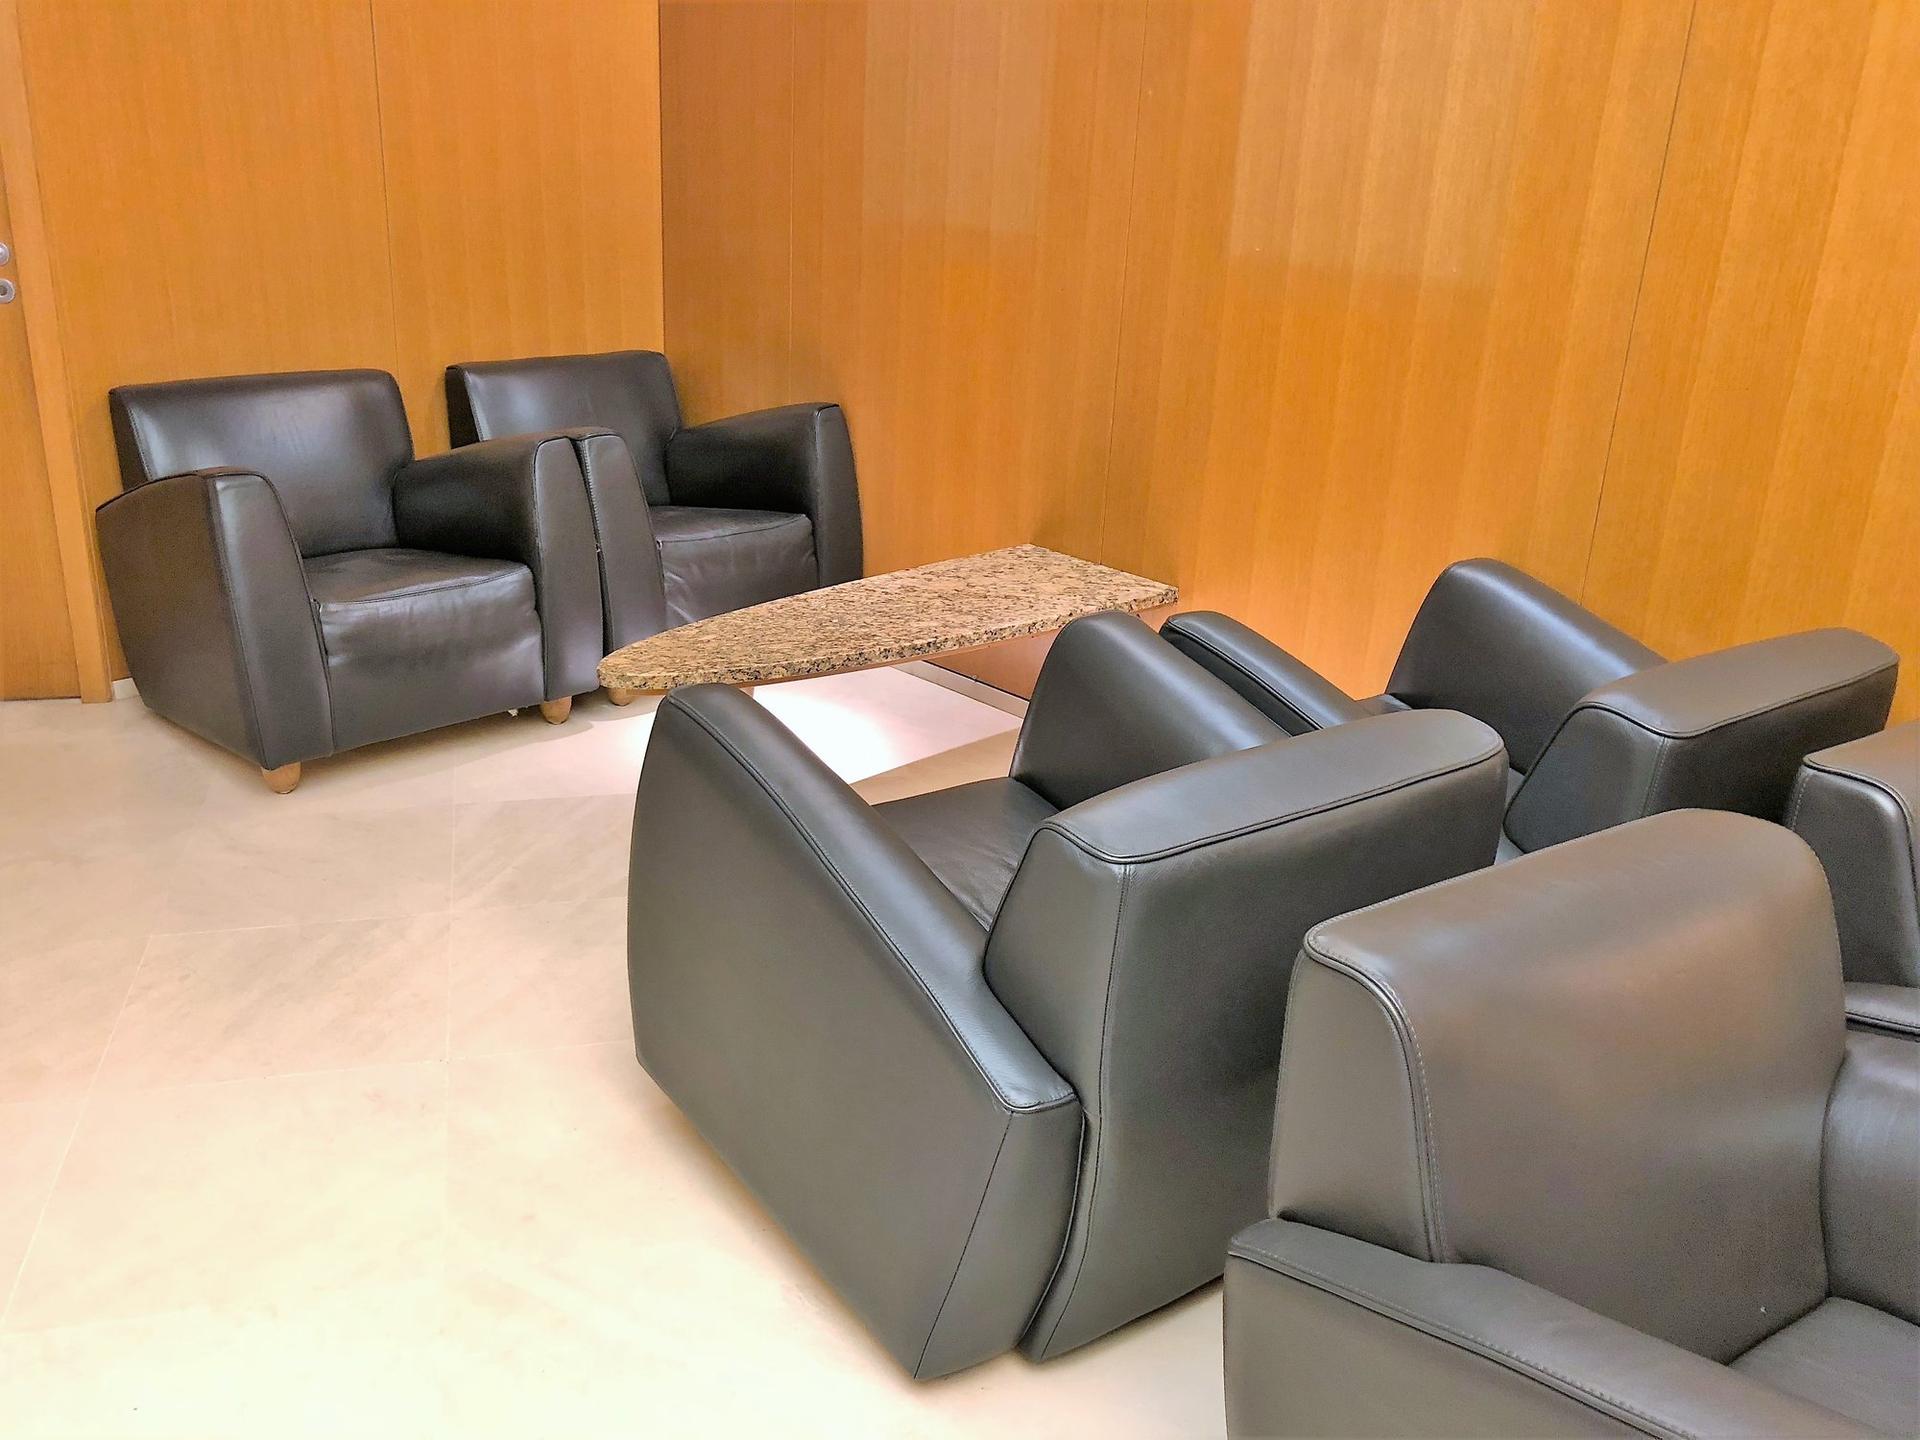 Air Canada Maple Leaf Lounge image 64 of 64